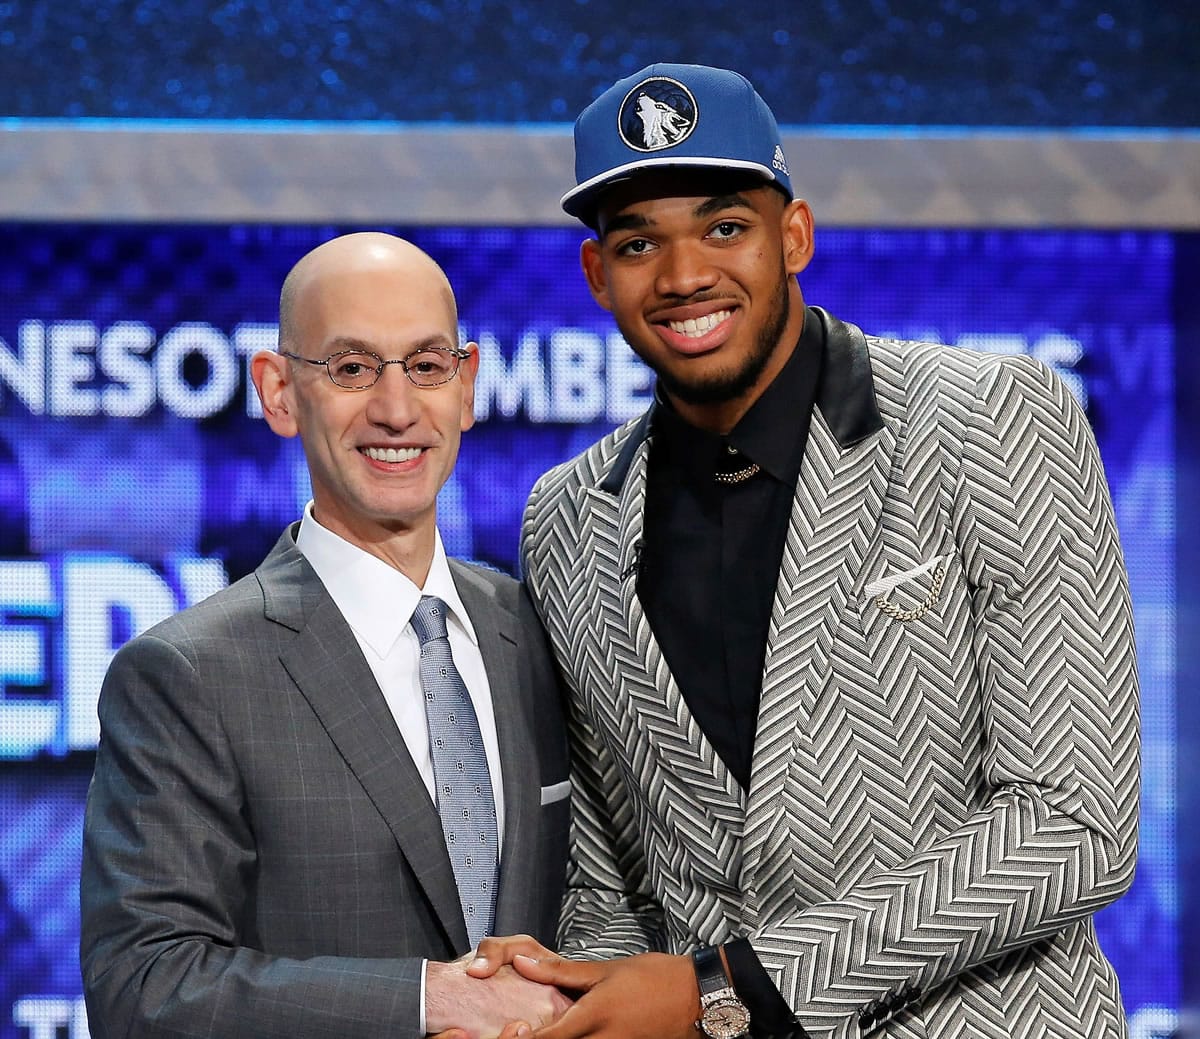 Karl-Anthony Towns, right, poses for a photo with NBA Commissioner Adam Silver after being announced as the top pick during the NBA draft by the Minnesota Timberwolves, Thursday, June 25, 2015, in New York.